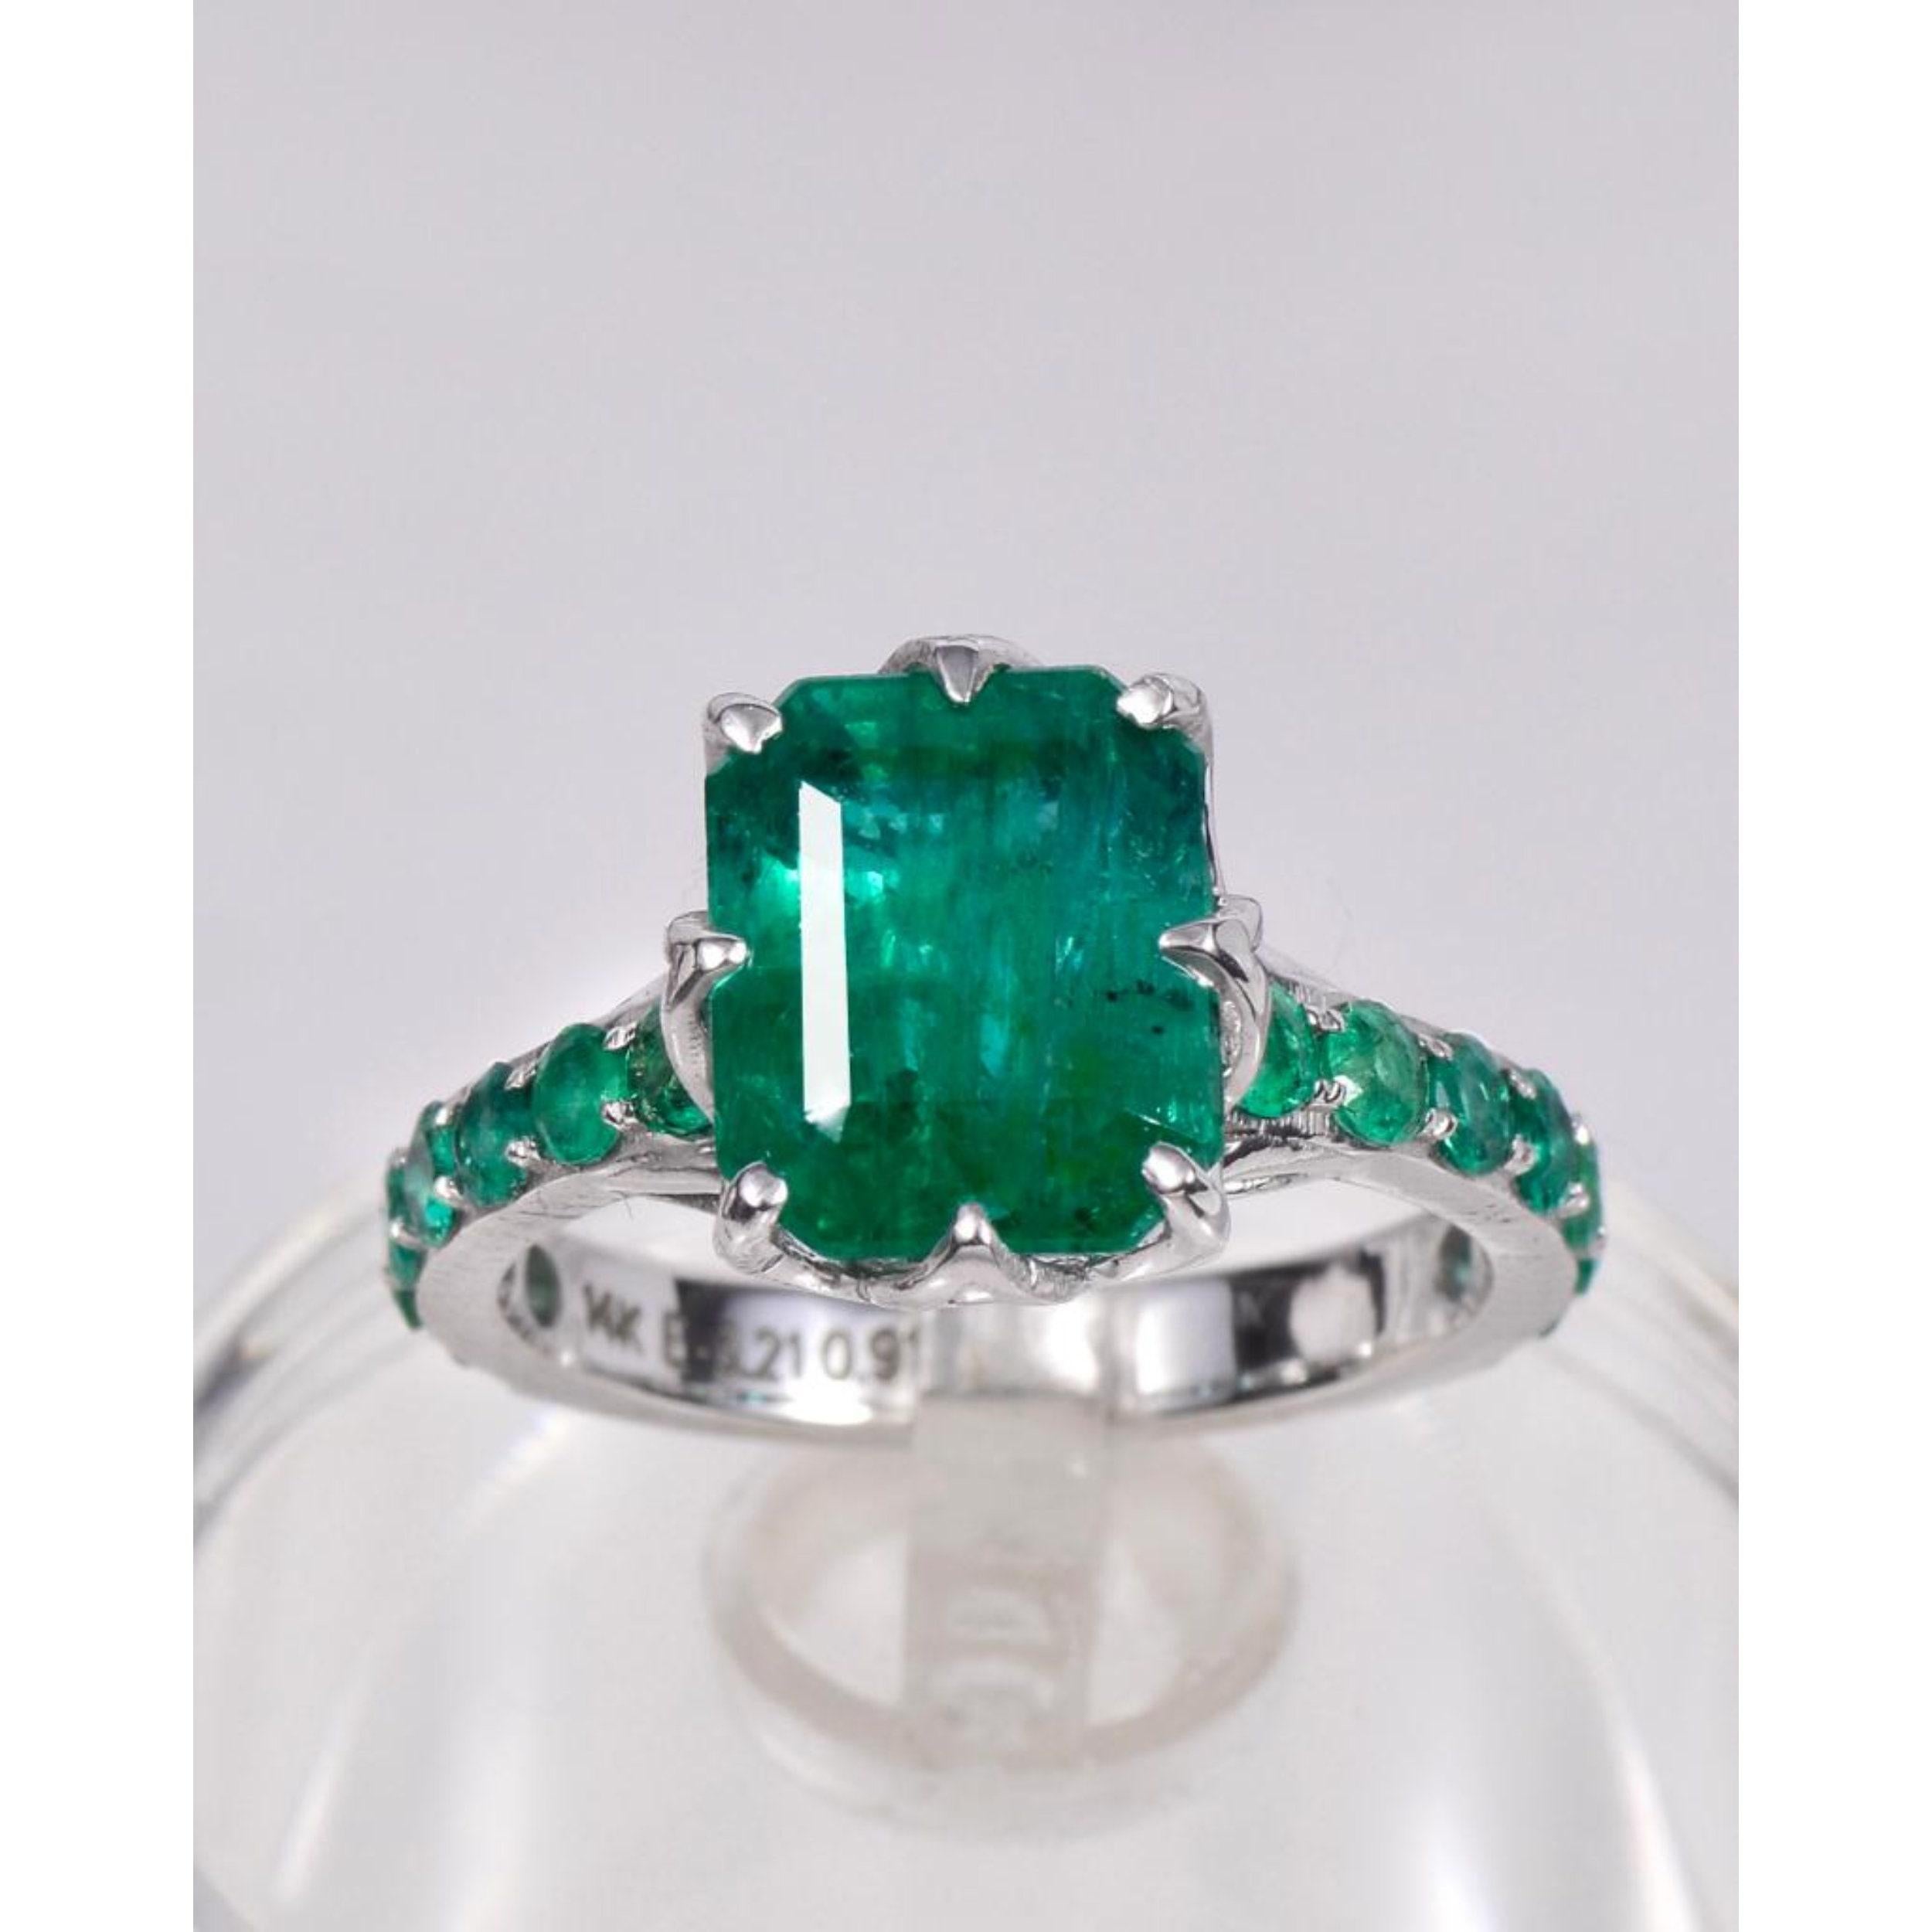 For Sale:  3 Carat Emerald Statement Ring, Natural Emerald Engagement Ring 5